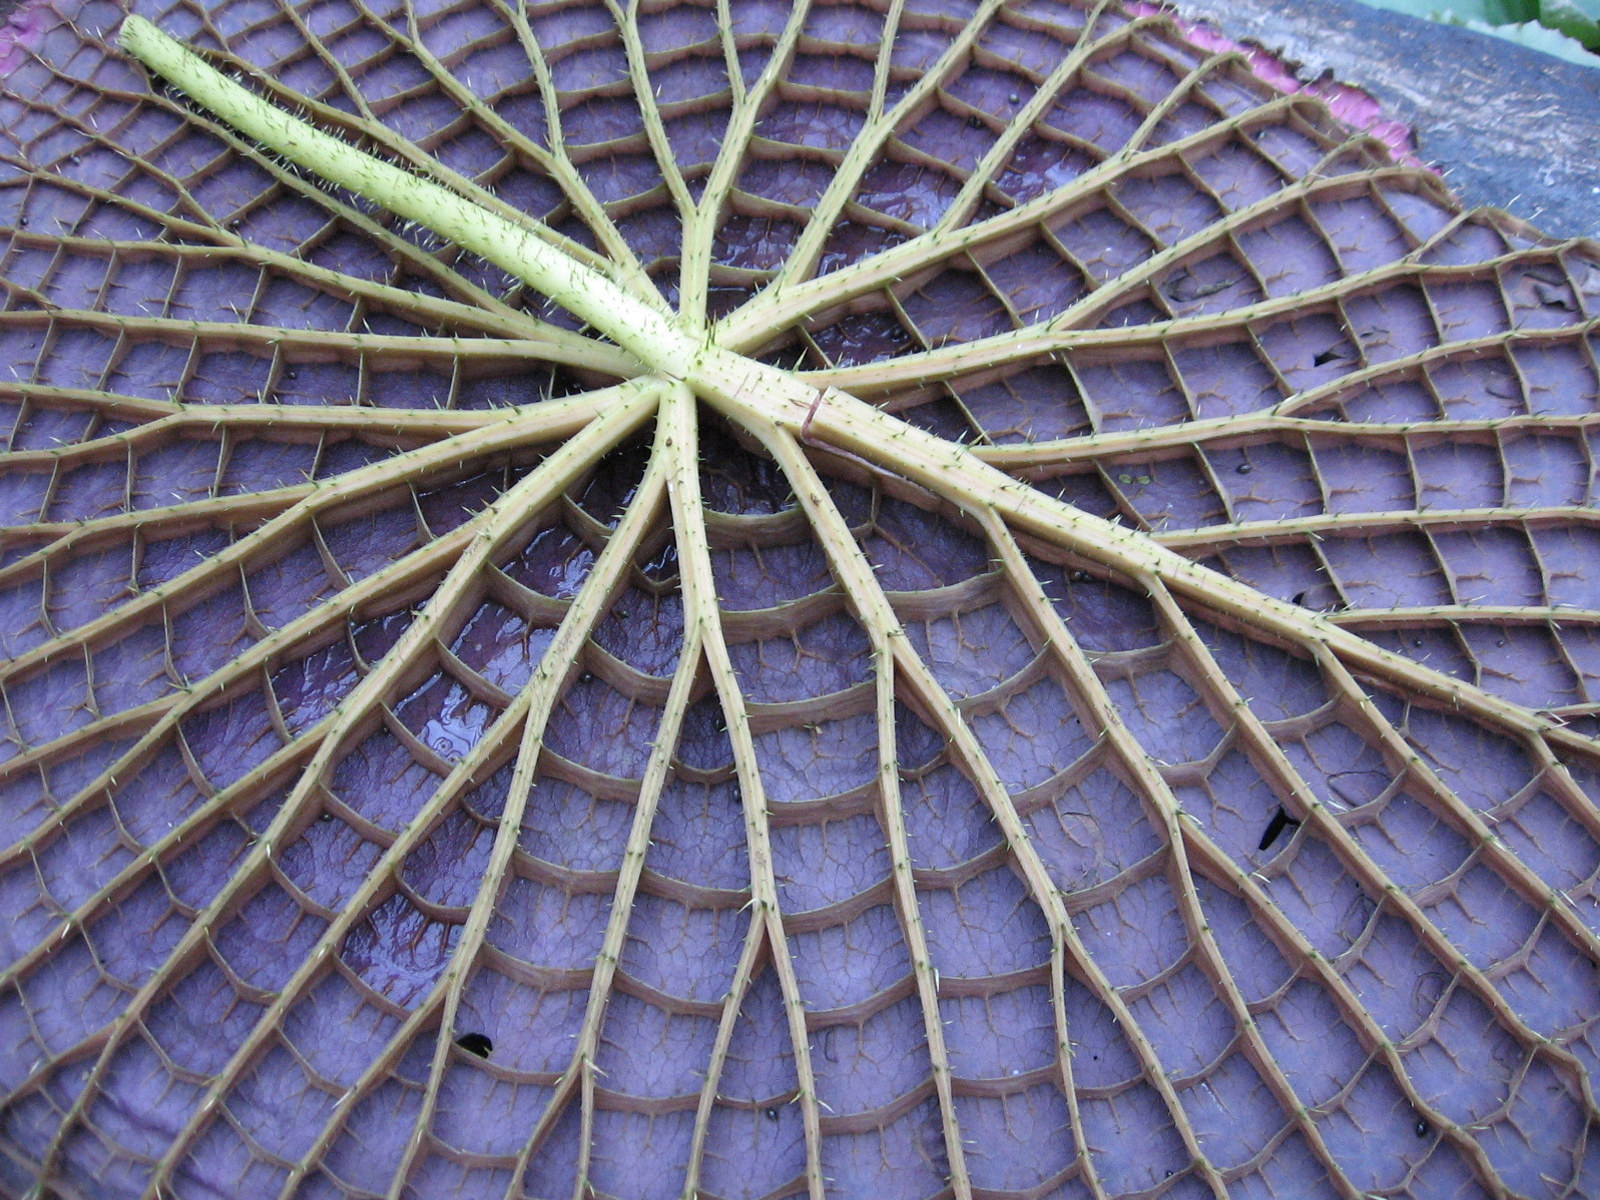 The complex green ribbing on the purple underside of the Victoria amazonica